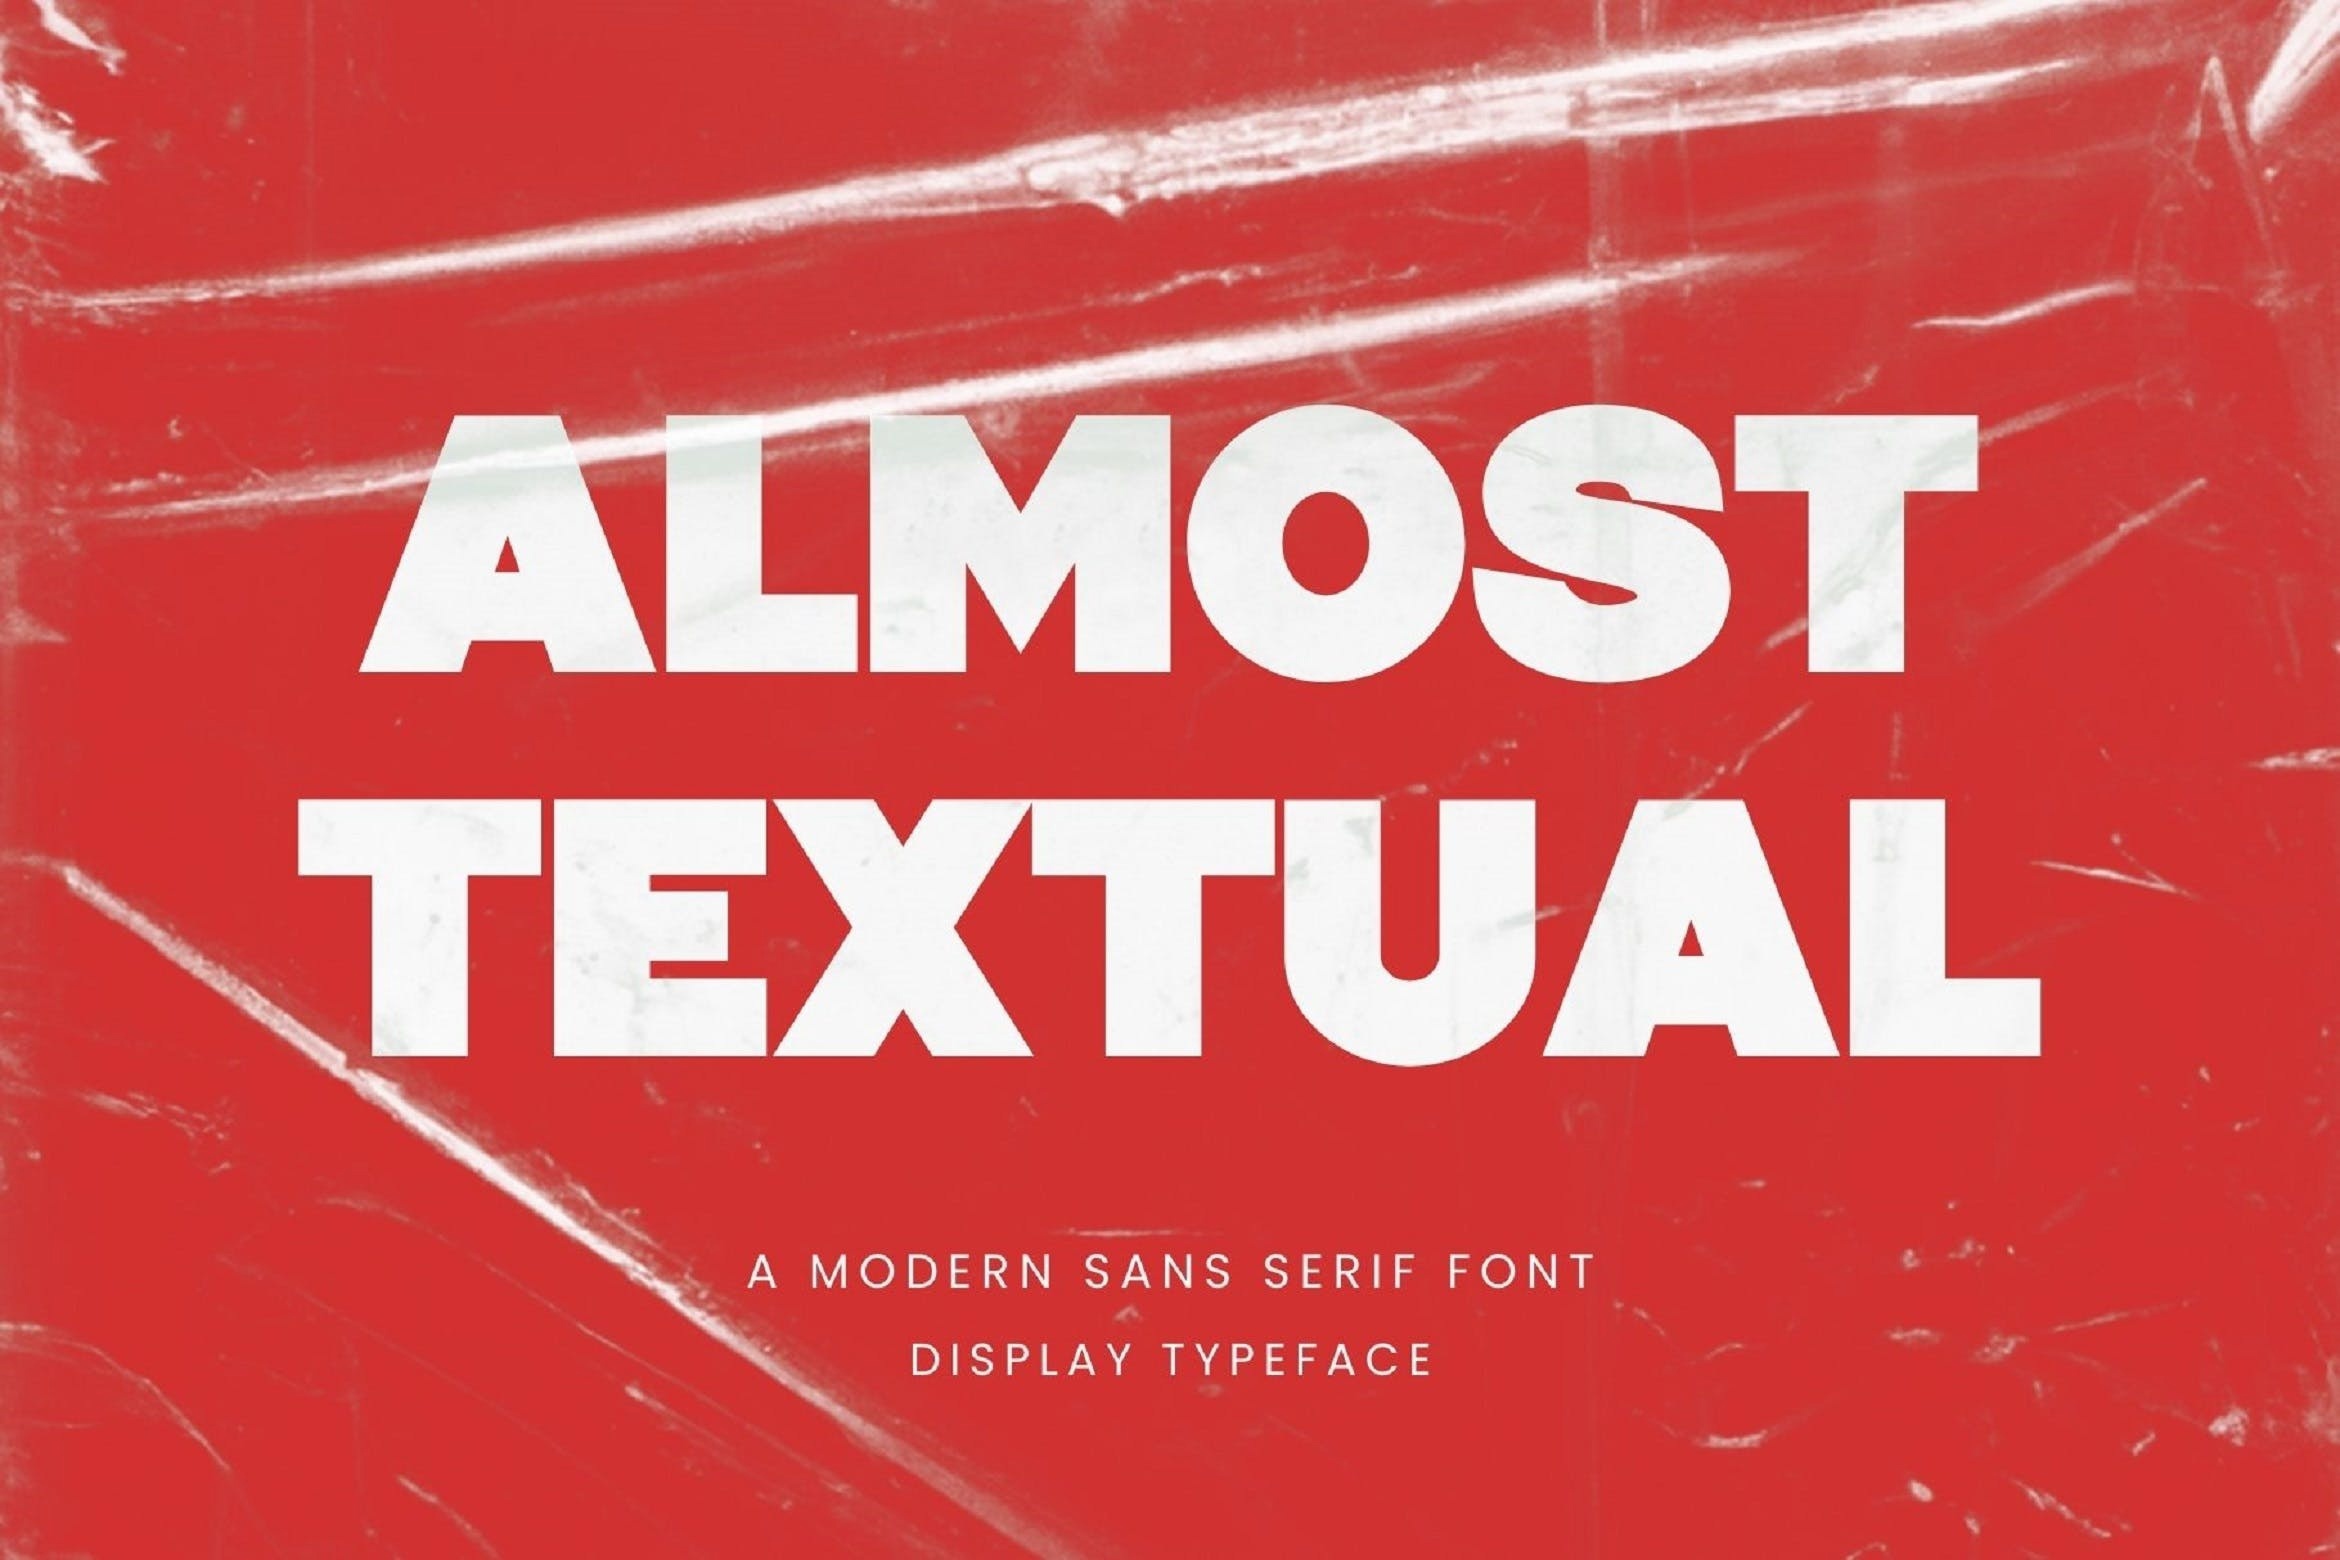 Font Almost Textual